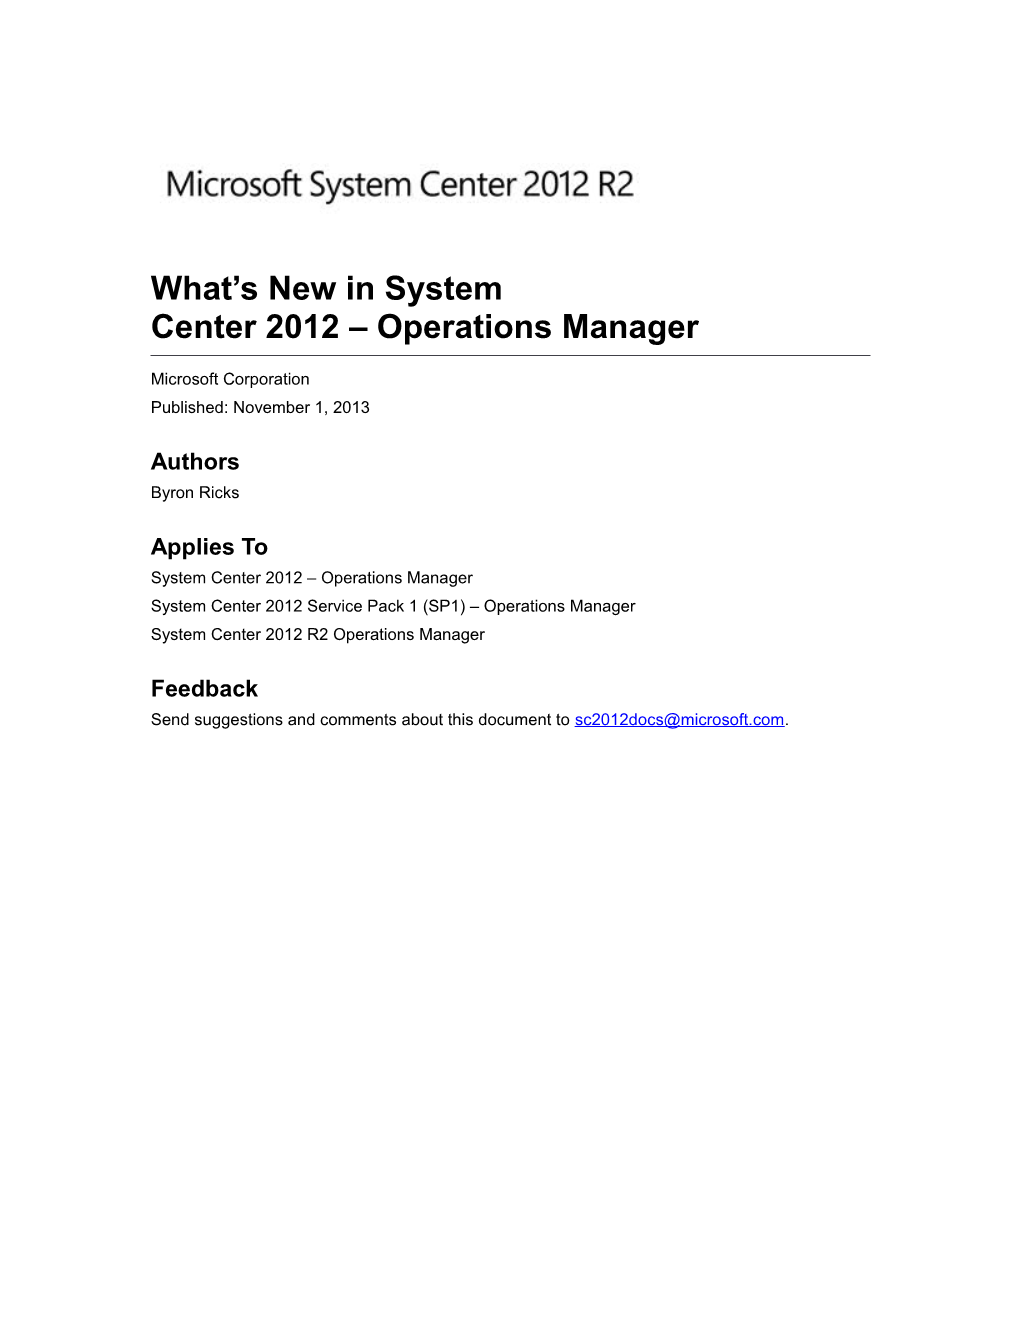 What S New in System Center2012 Operations Manager